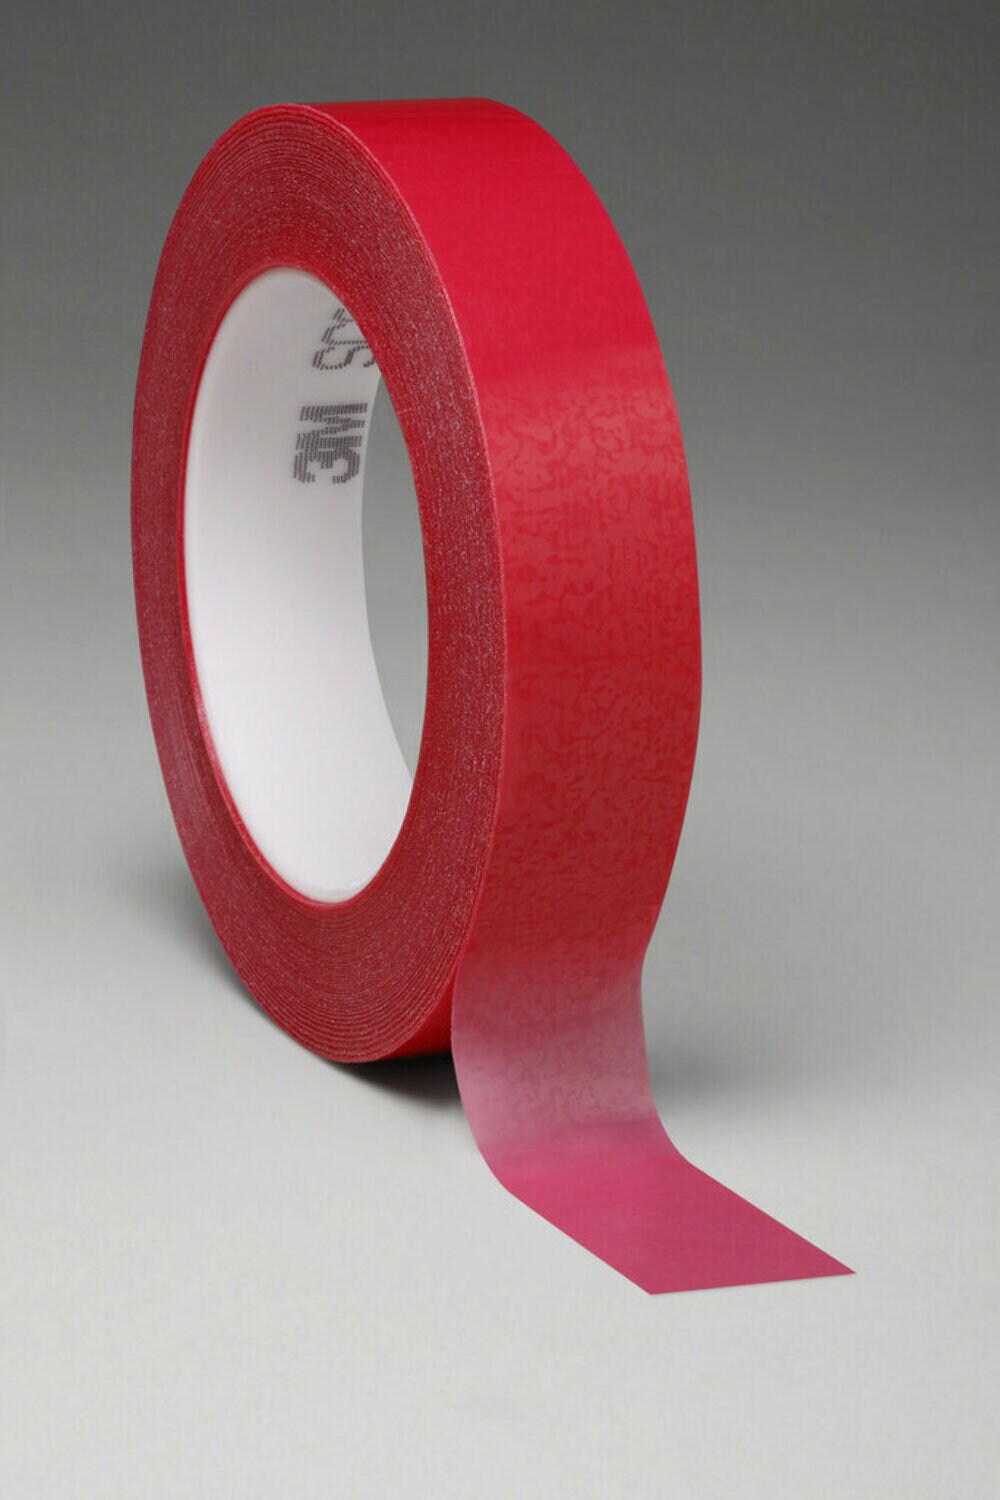 7010048805 - 3M Circuit Plating Tape 1280 Red, 48 in x 72 yds x 4.2 mil, 1/Case